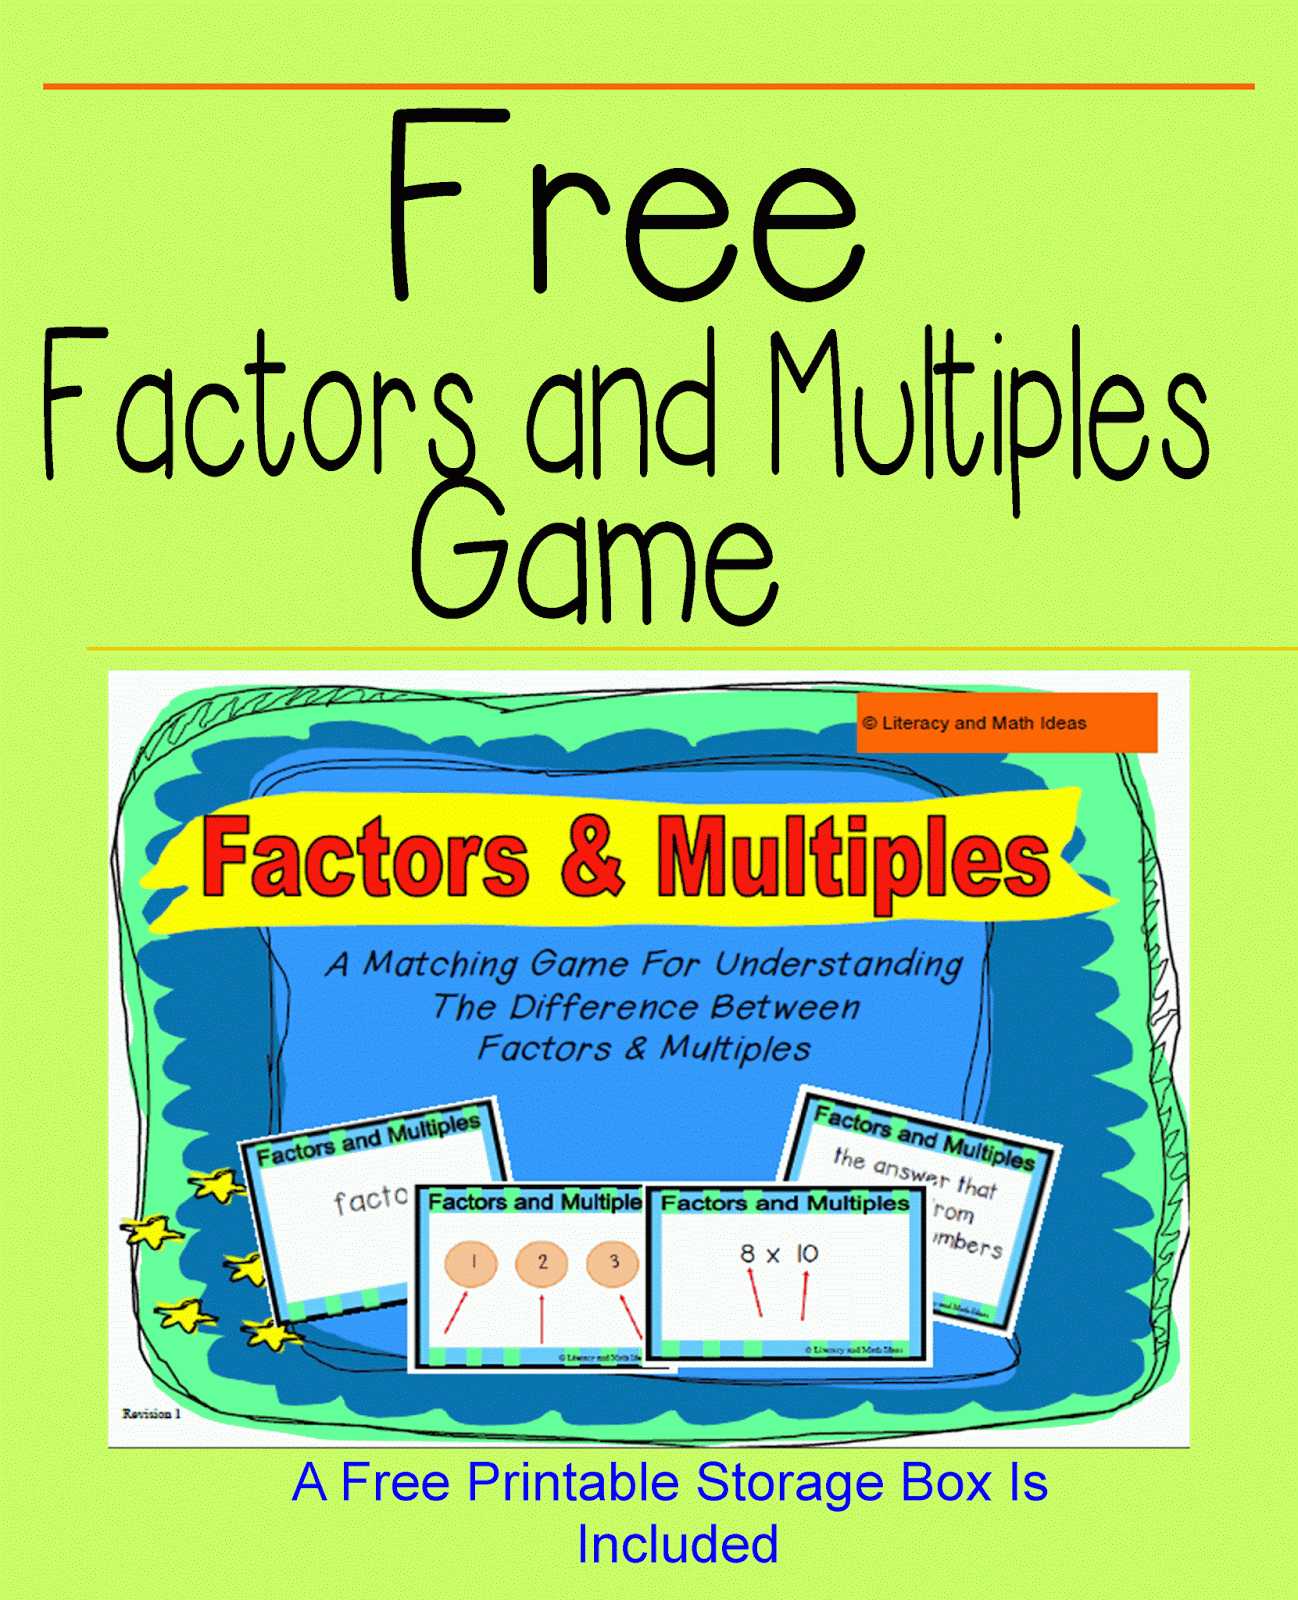 Progressive Era Review Worksheet Answers Along with Literacy & Math Ideas Free Factors and Multiples Game